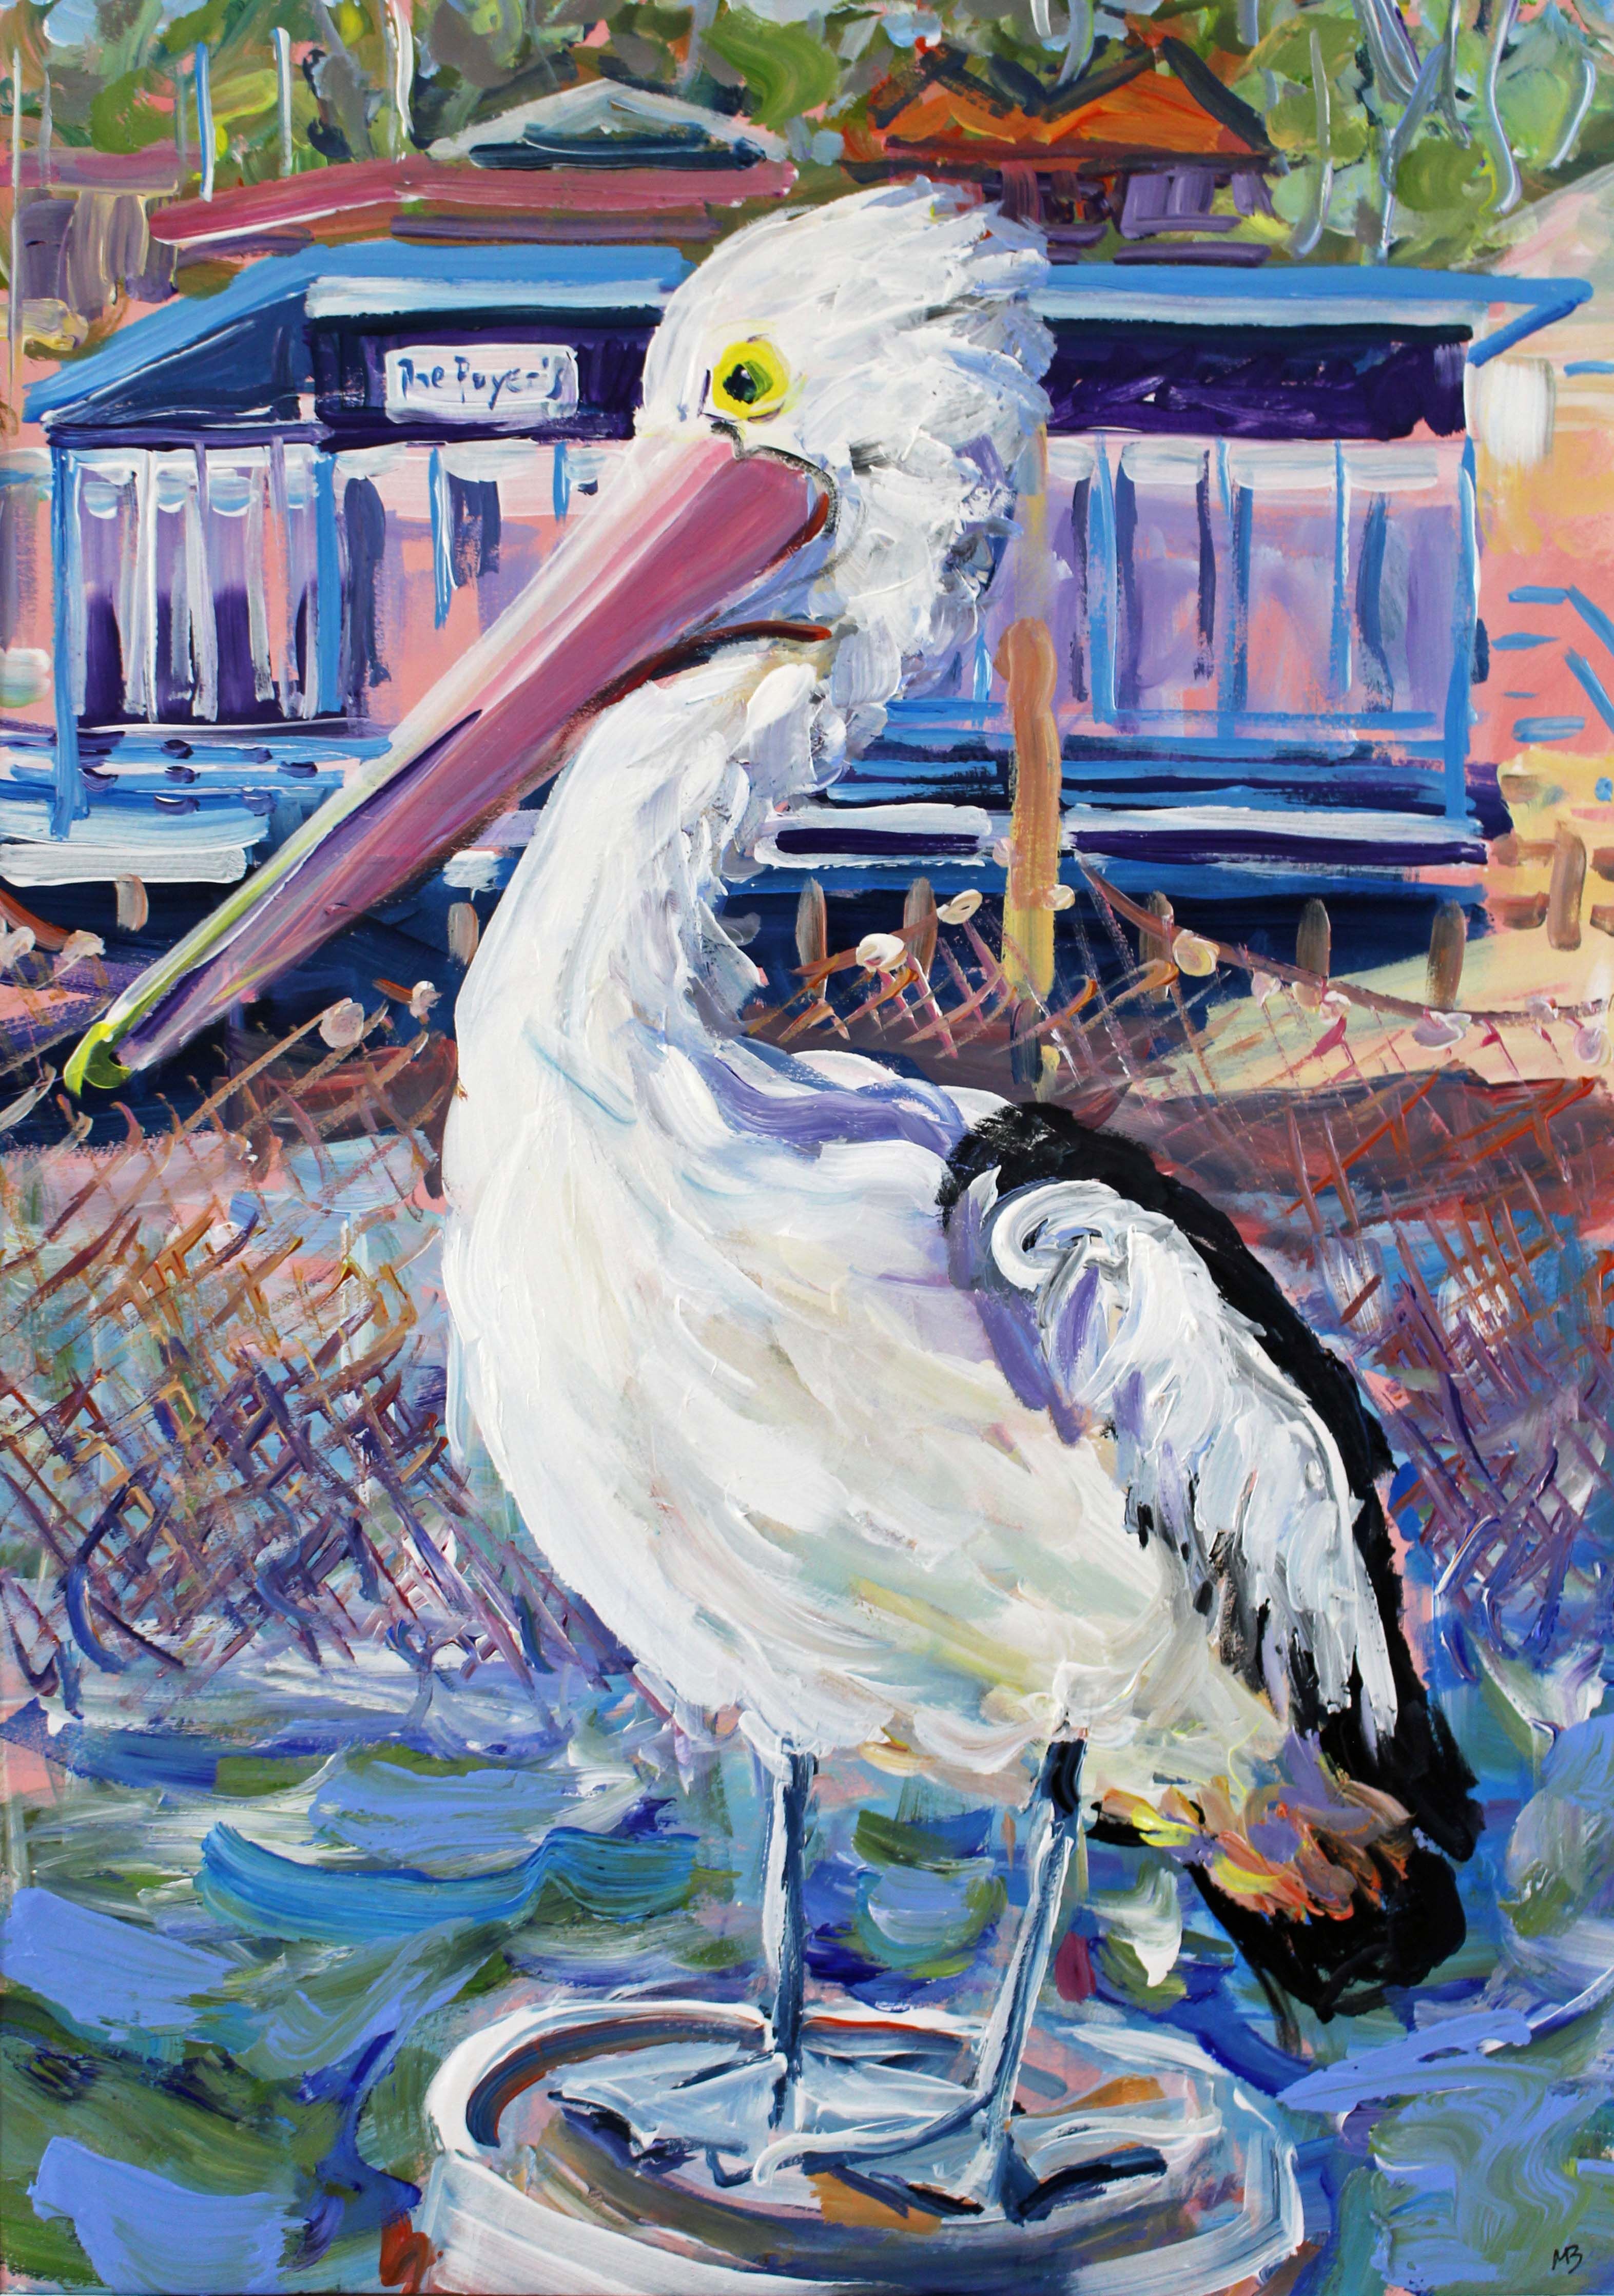 Poyer's pelican A2 image A1 frame Megan_Barrass 1mbe